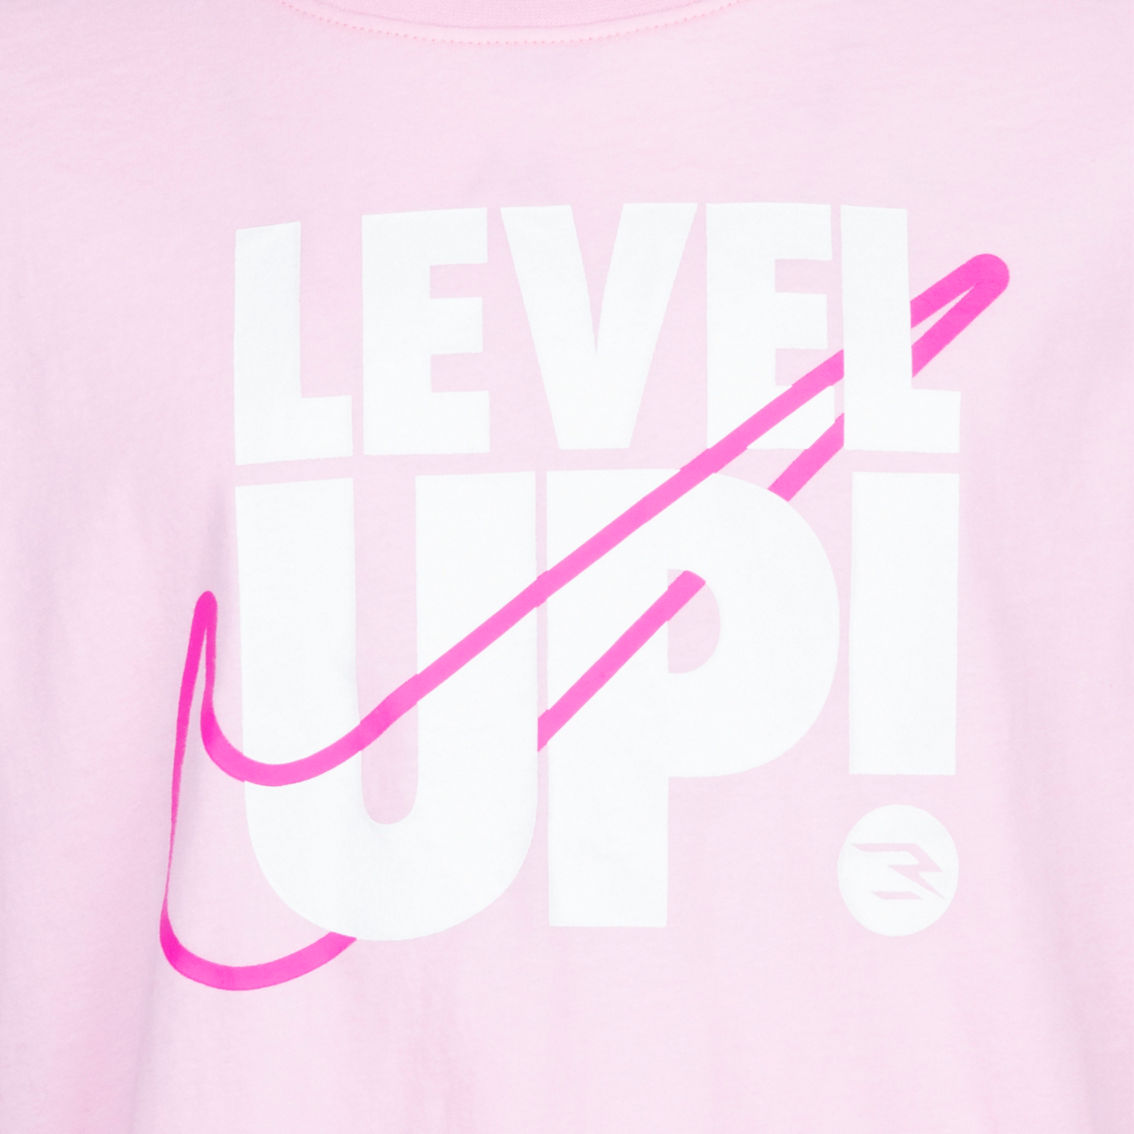 3Brand by Russell Wilson Girls Level Up Tee - Image 3 of 4